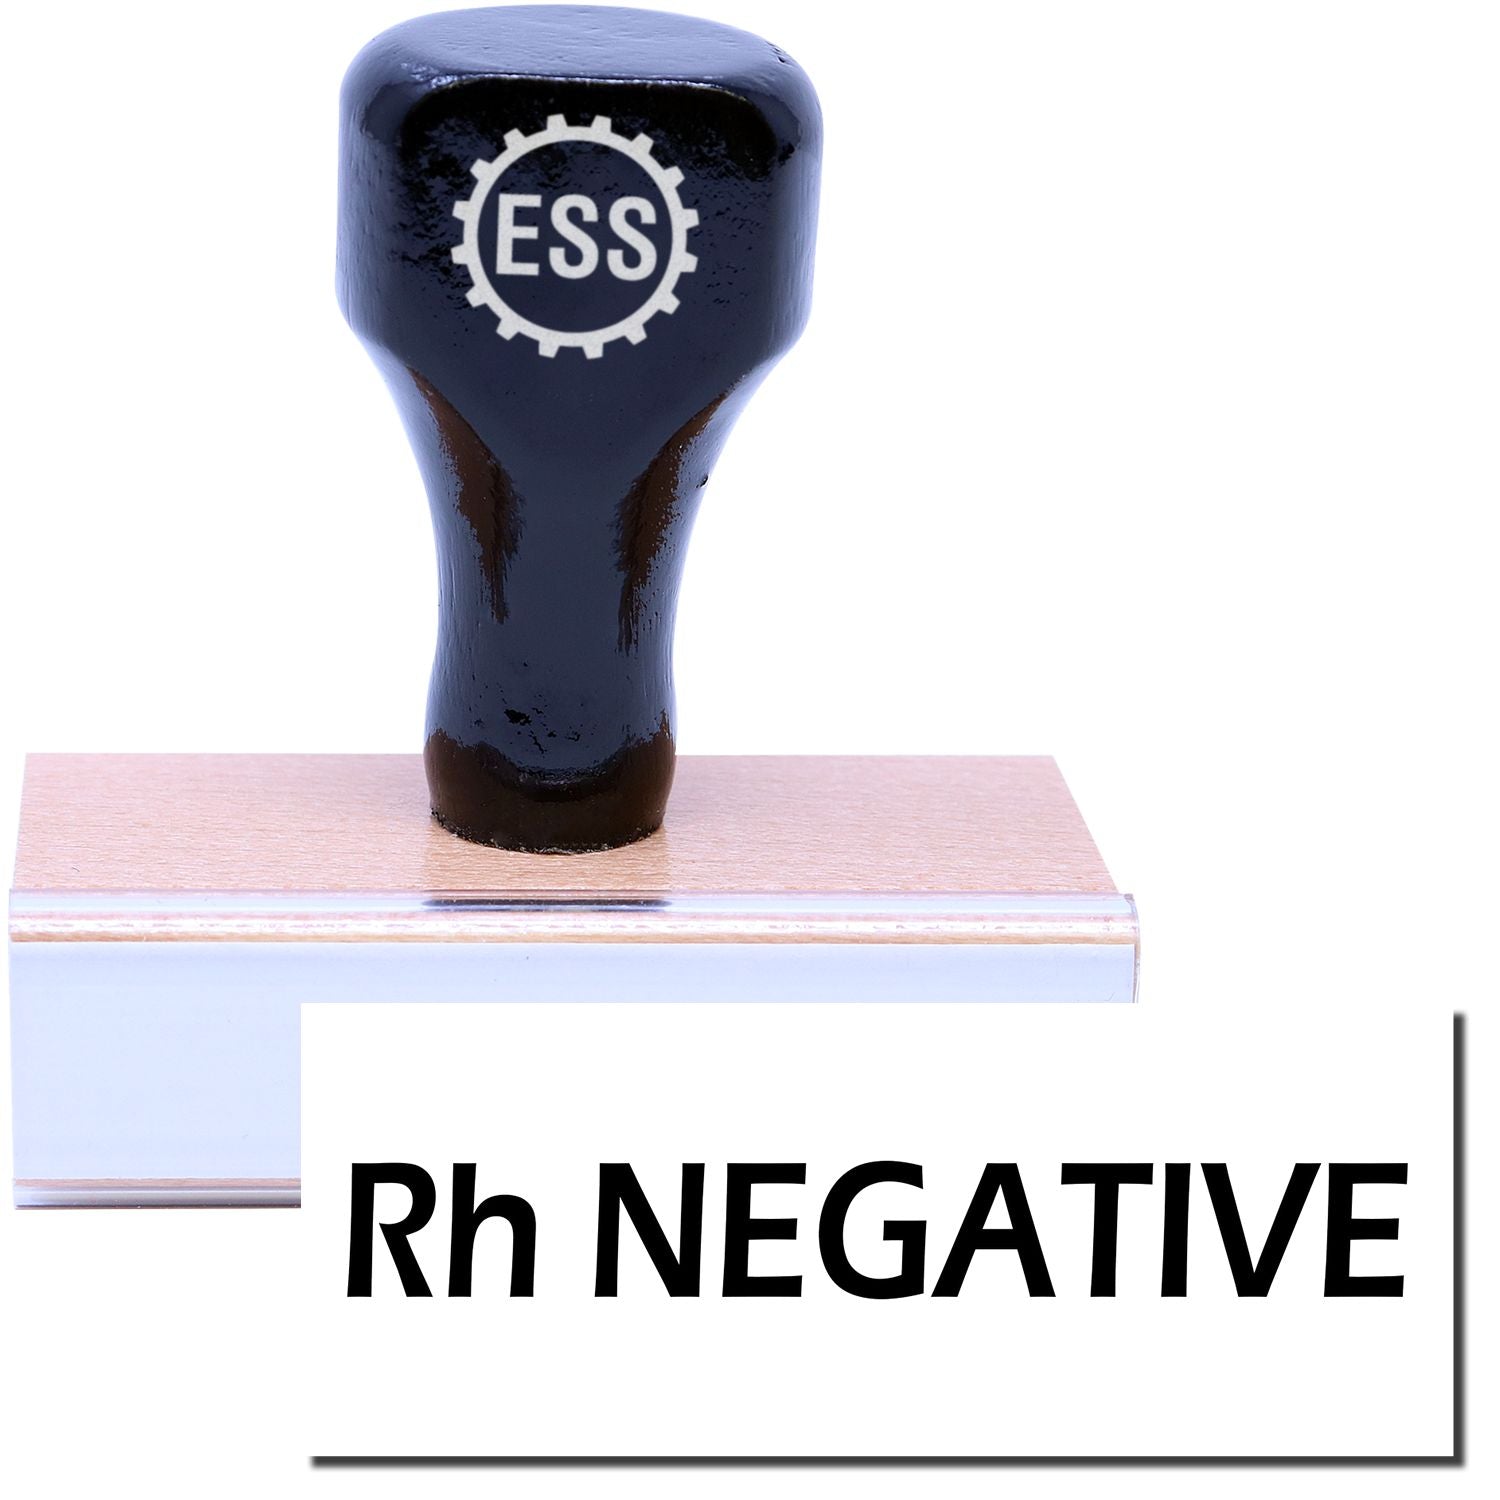 A stock office rubber stamp with a stamped image showing how the text "Rh NEGATIVE" in a large font is displayed after stamping.